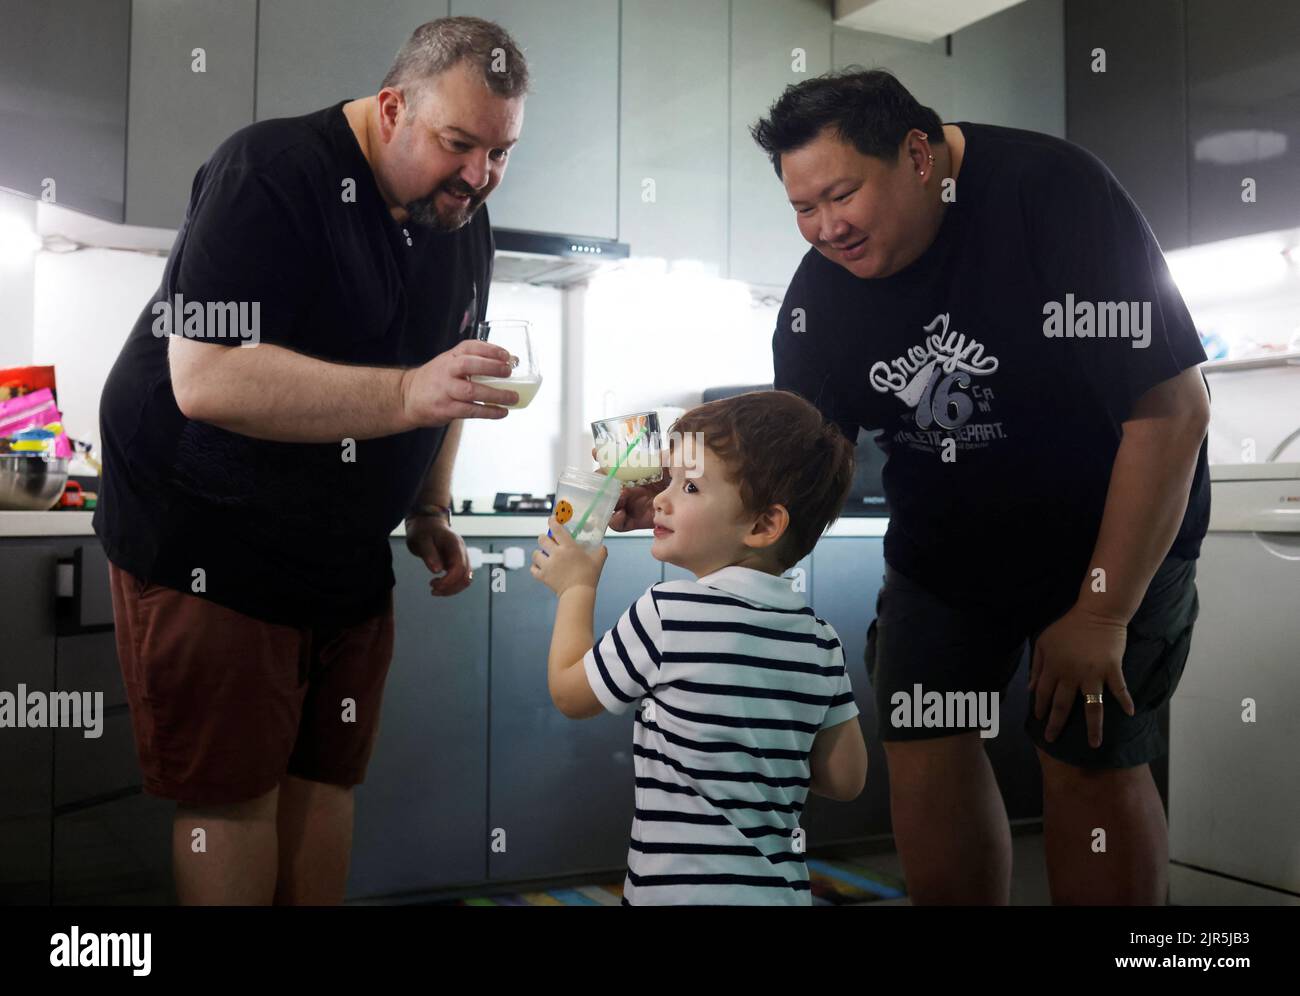 Same-sex parents Andre Ling, 44, and Cameron Sutherland, 47, make lemonade with their two year old son Tyler at home in Singapore, August 22, 2022. REUTERS/Edgar Su Stock Photo